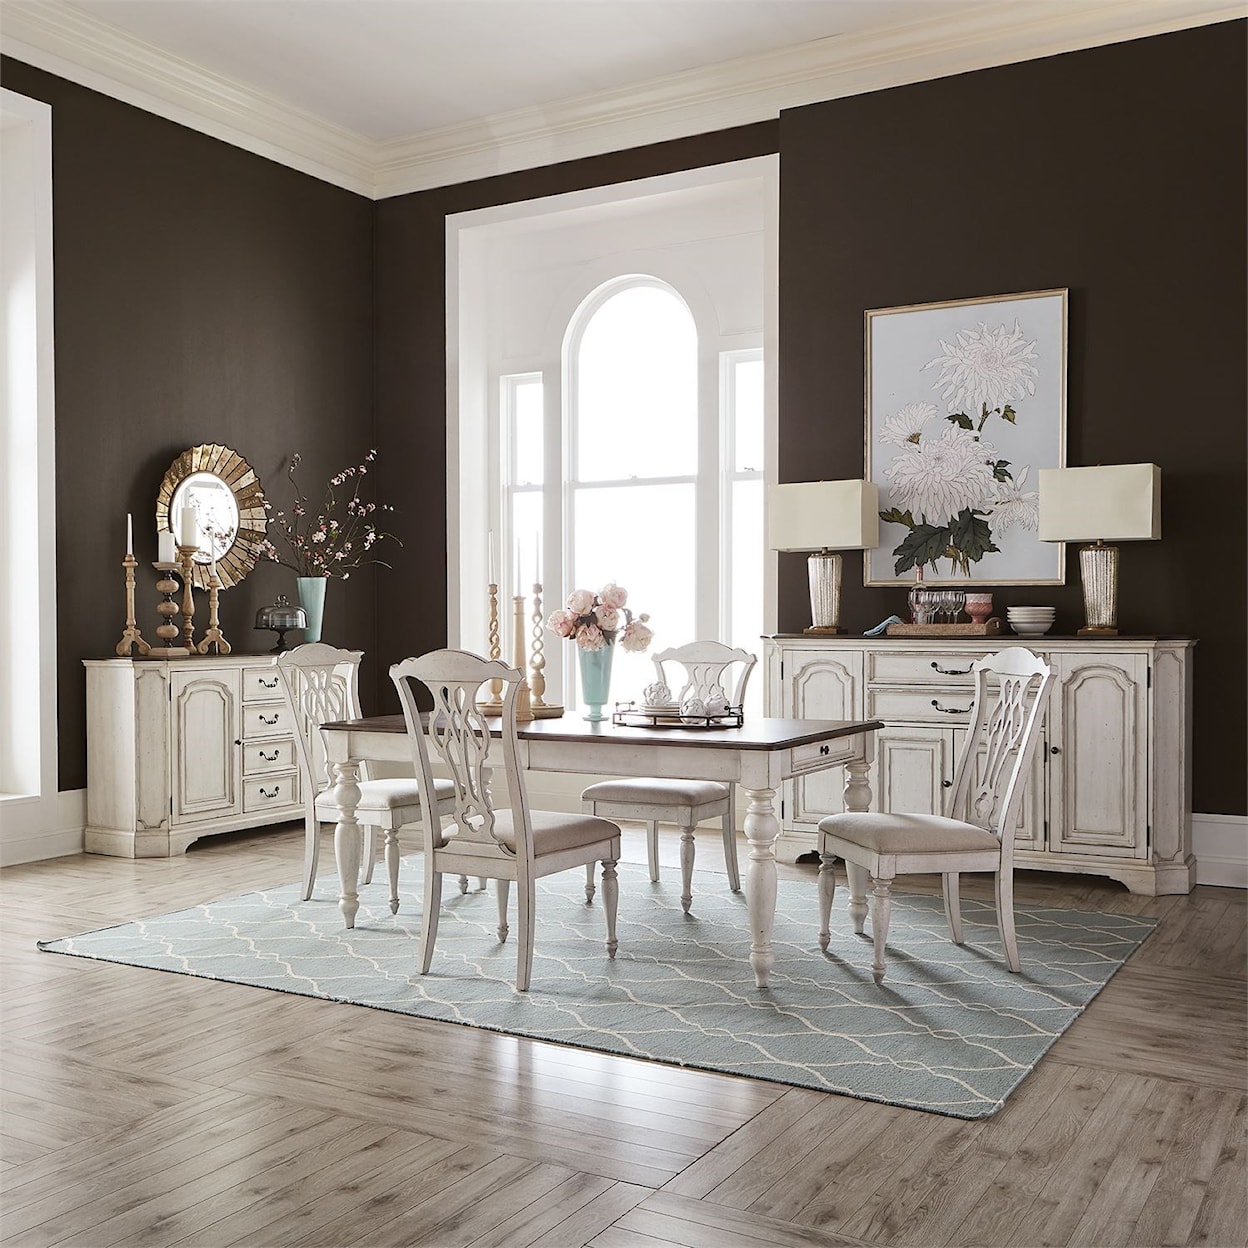 Liberty Furniture Abbey Road Casual Dining Room Group